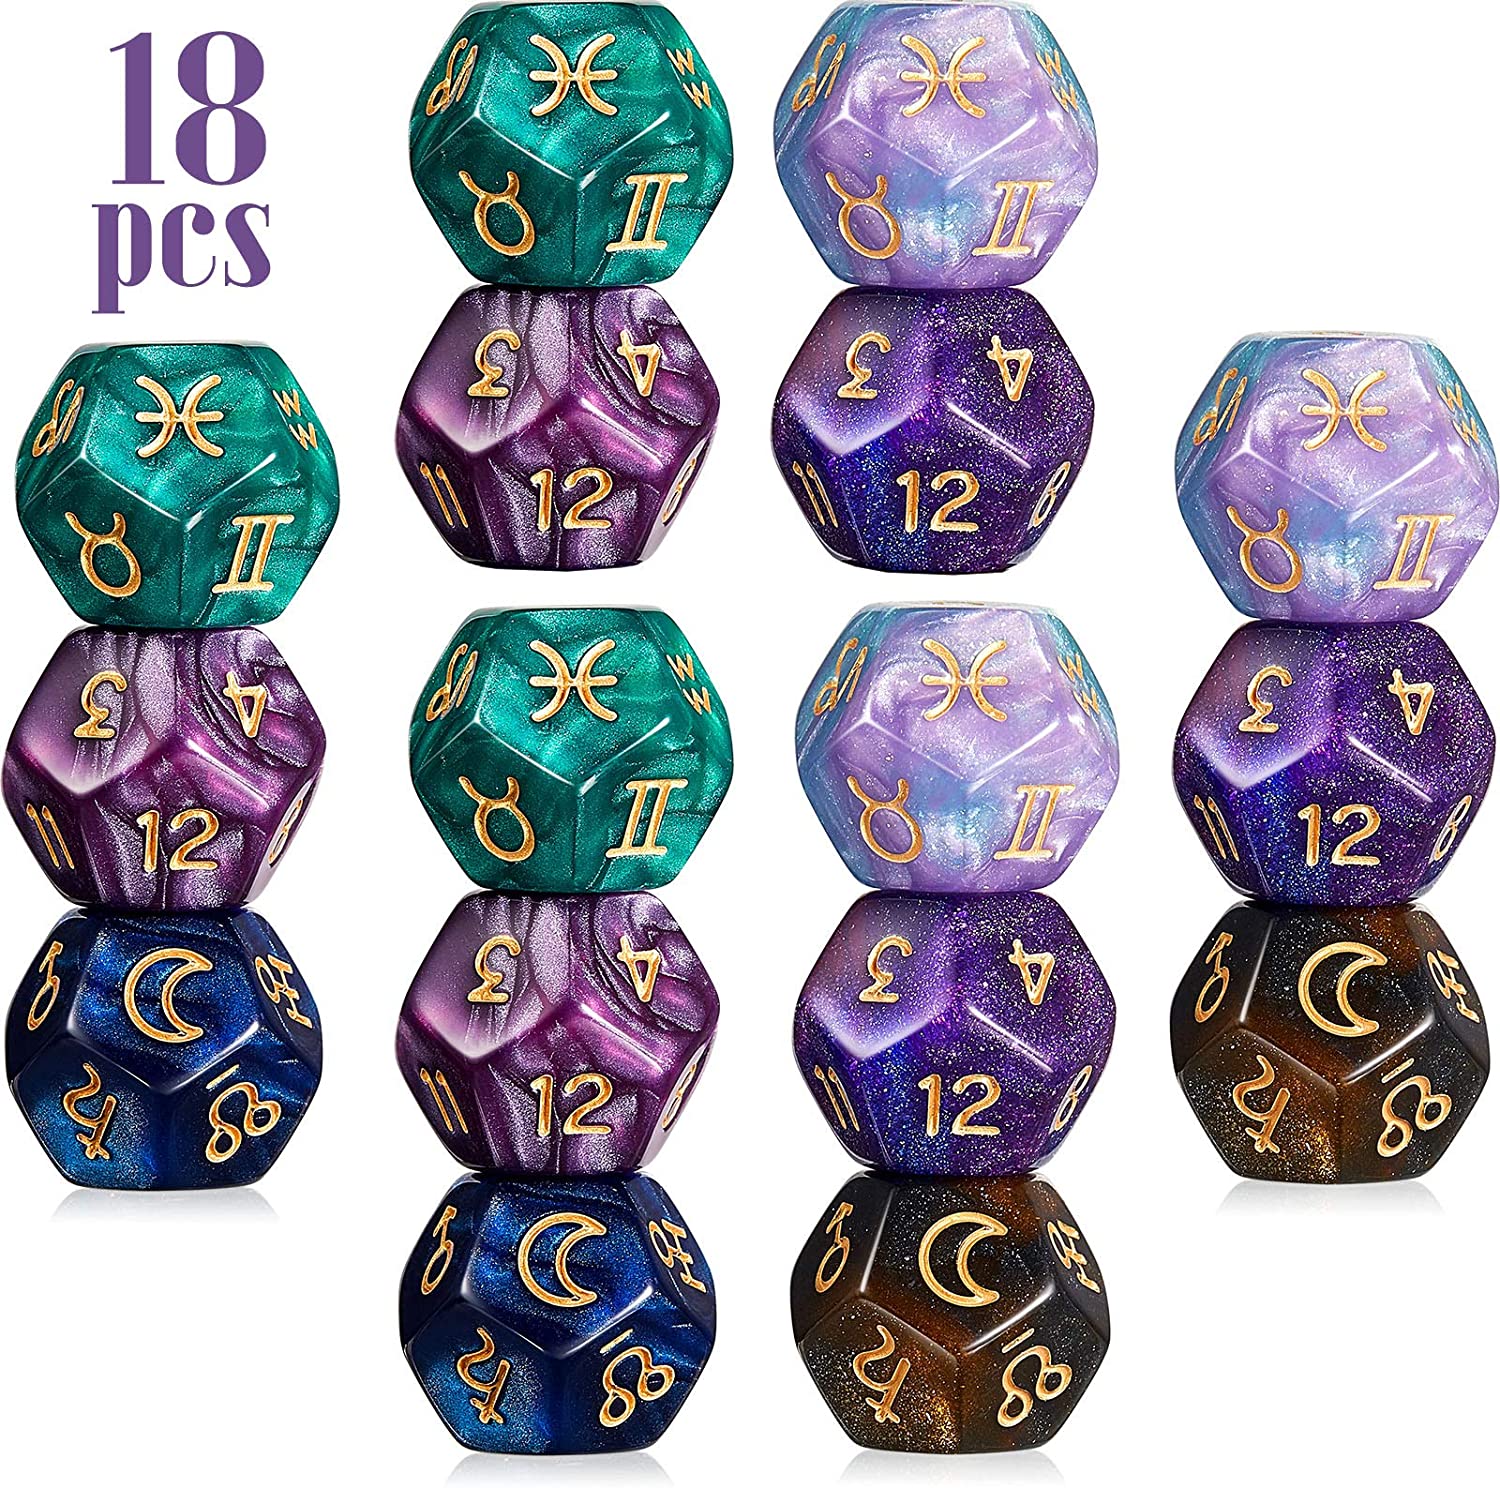 Jili Online 3 Pieces of Multi-sided Acrylic Pearl Astrological Dice for Constellation Divination Accessory 